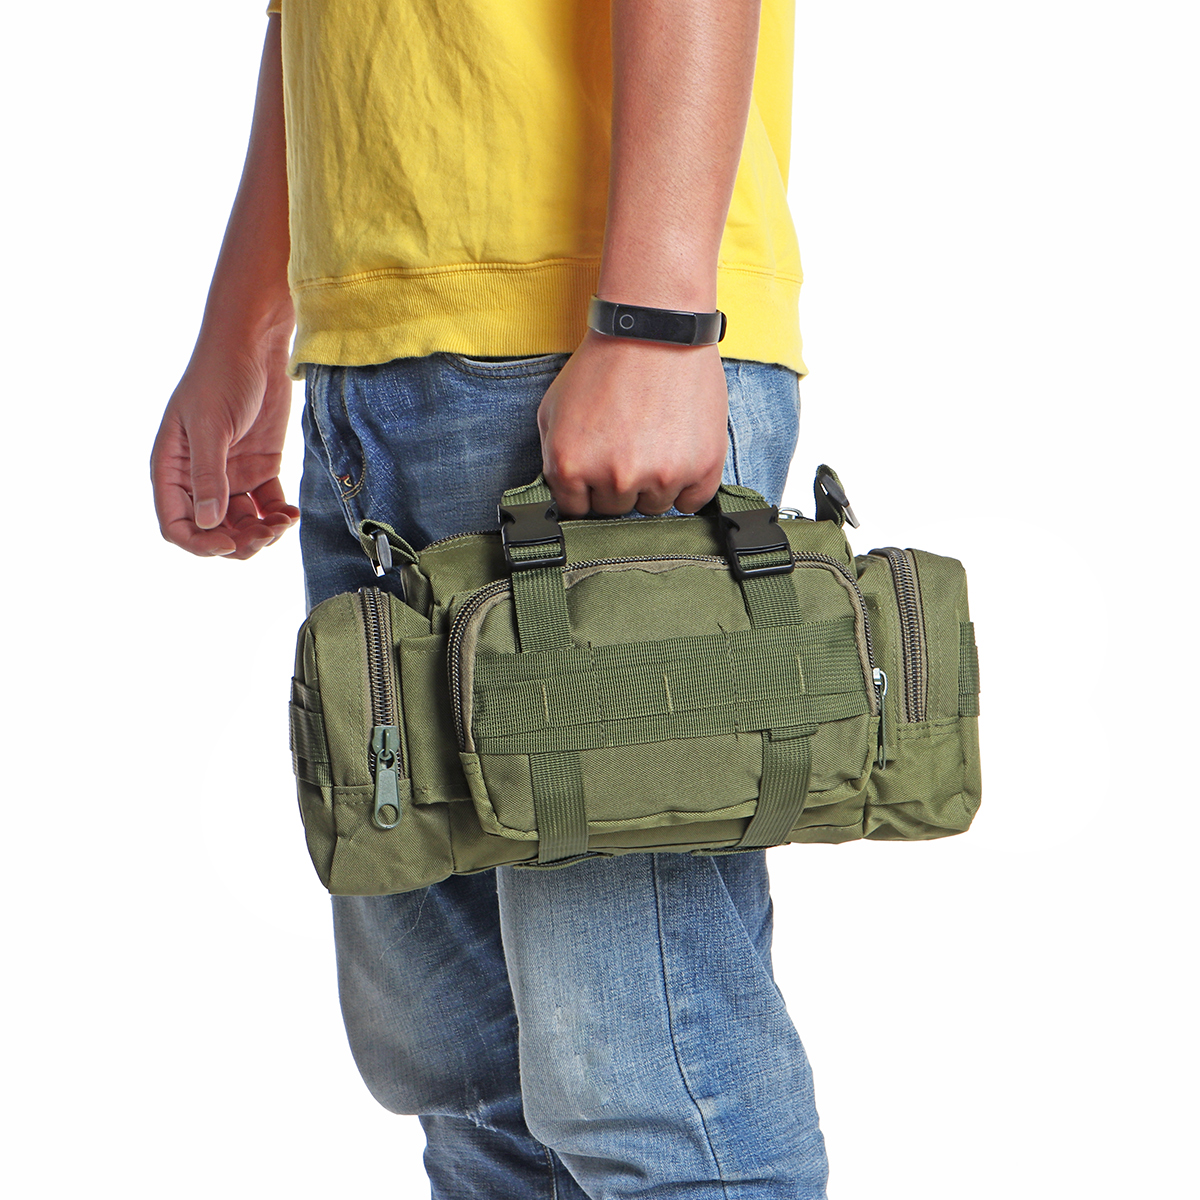 Multifunctional-Outdoor-Sports-Hiking-with-Zippers-Nylon-Oxford-Cloth-Tactical-Shoulder-Bag-Waist-Pa-1825563-29